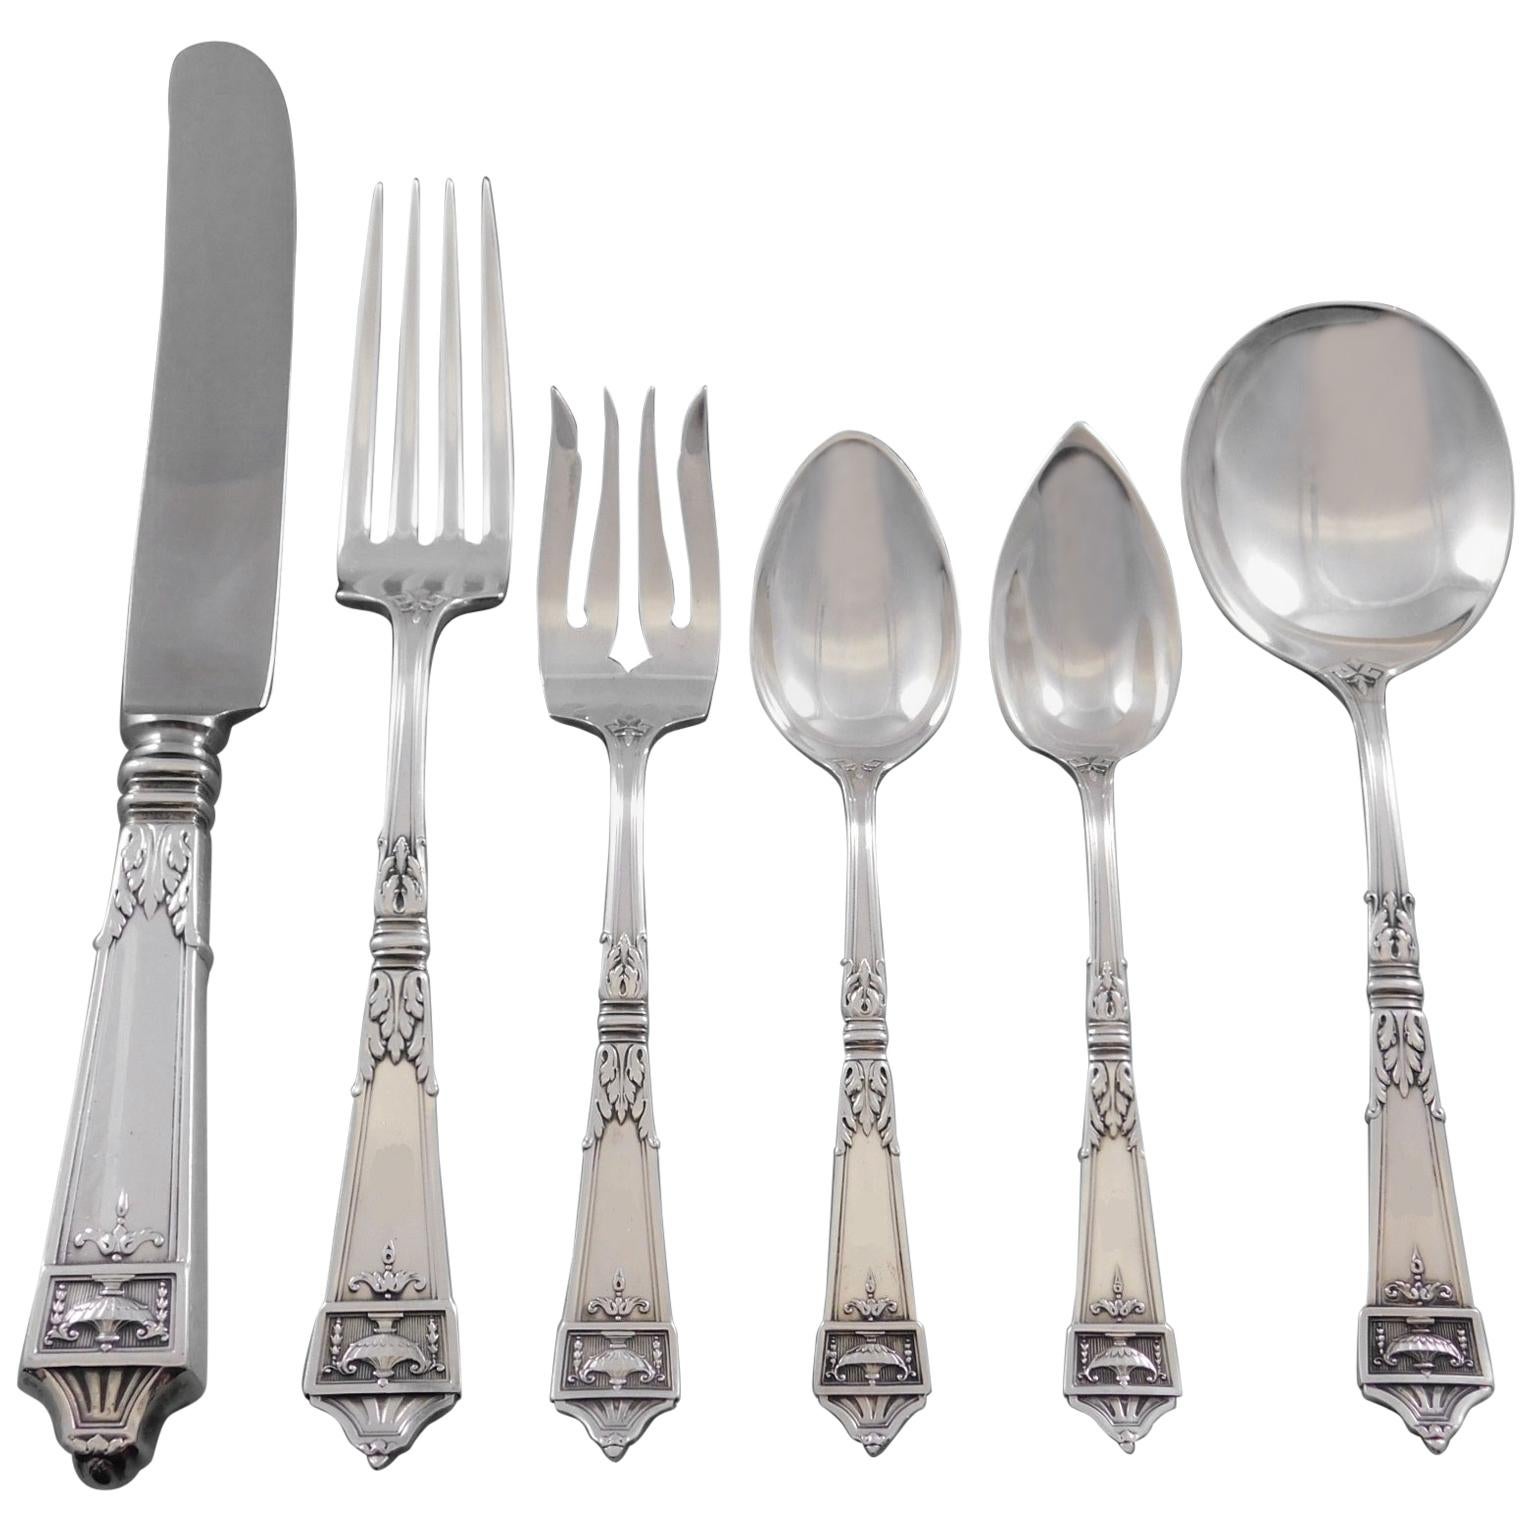 Lansdowne by Gorham Sterling Silver Flatware Set for 12 Service 72 Pieces Dinner